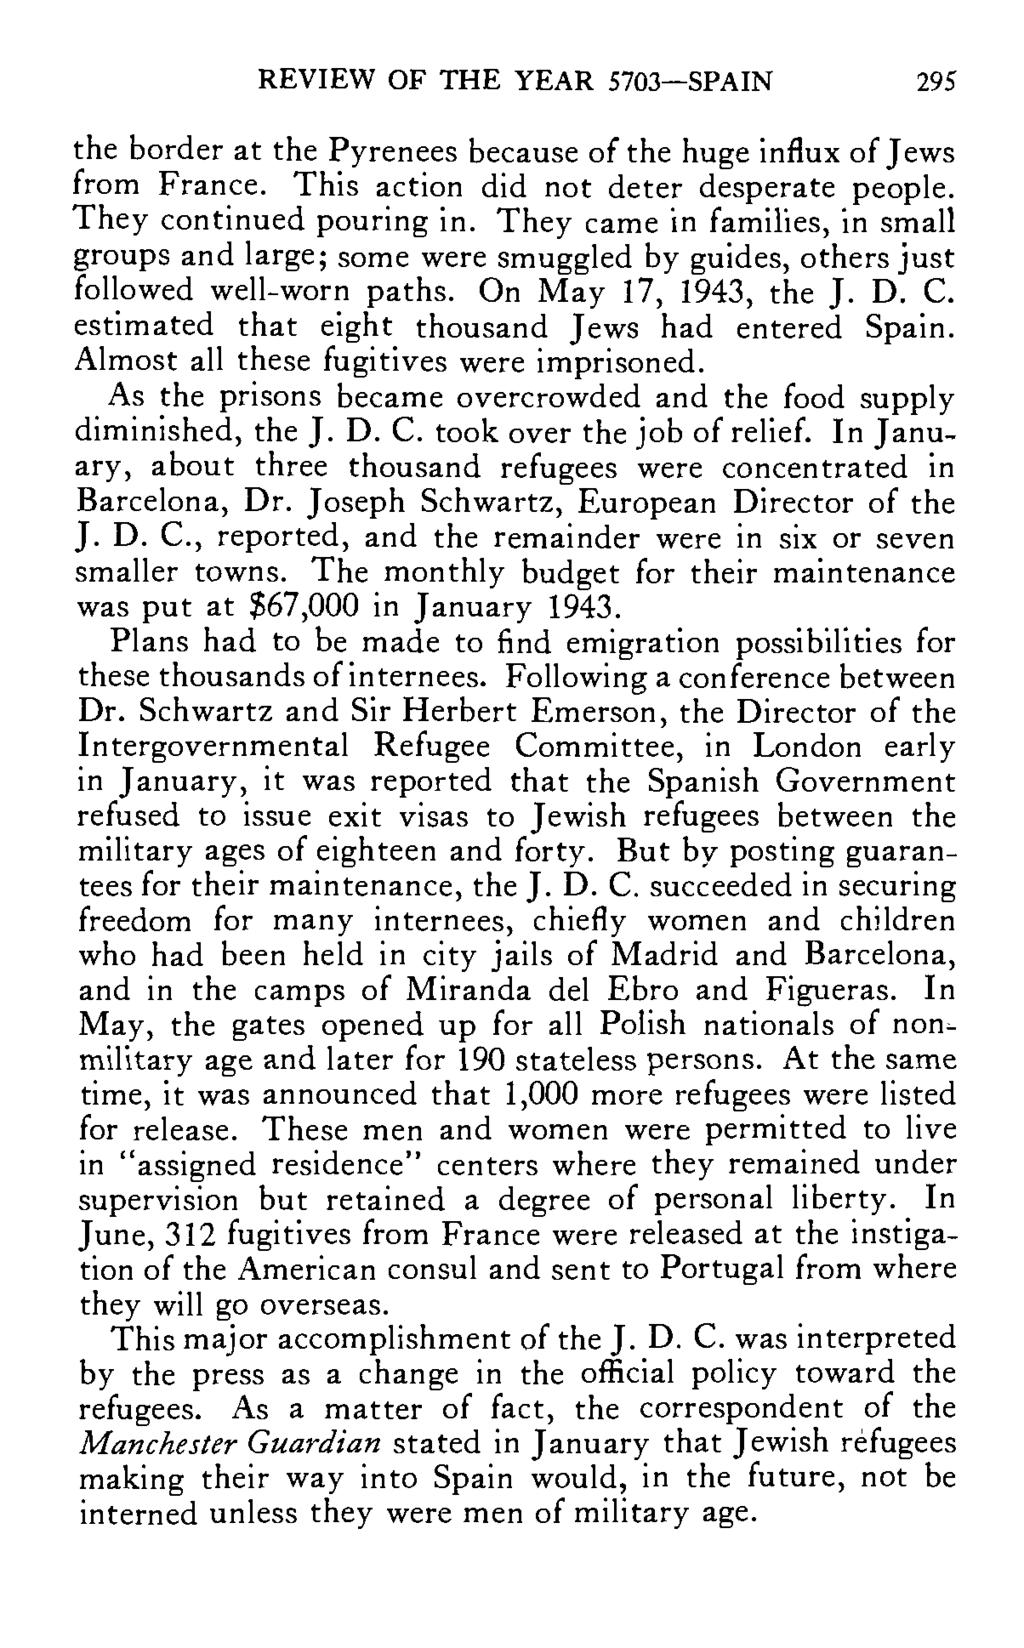 REVIEW OF THE YEAR 5703 SPAIN 295 the border at the Pyrenees because of the huge influx of Jews from France. This action did not deter desperate people. They continued pouring in.